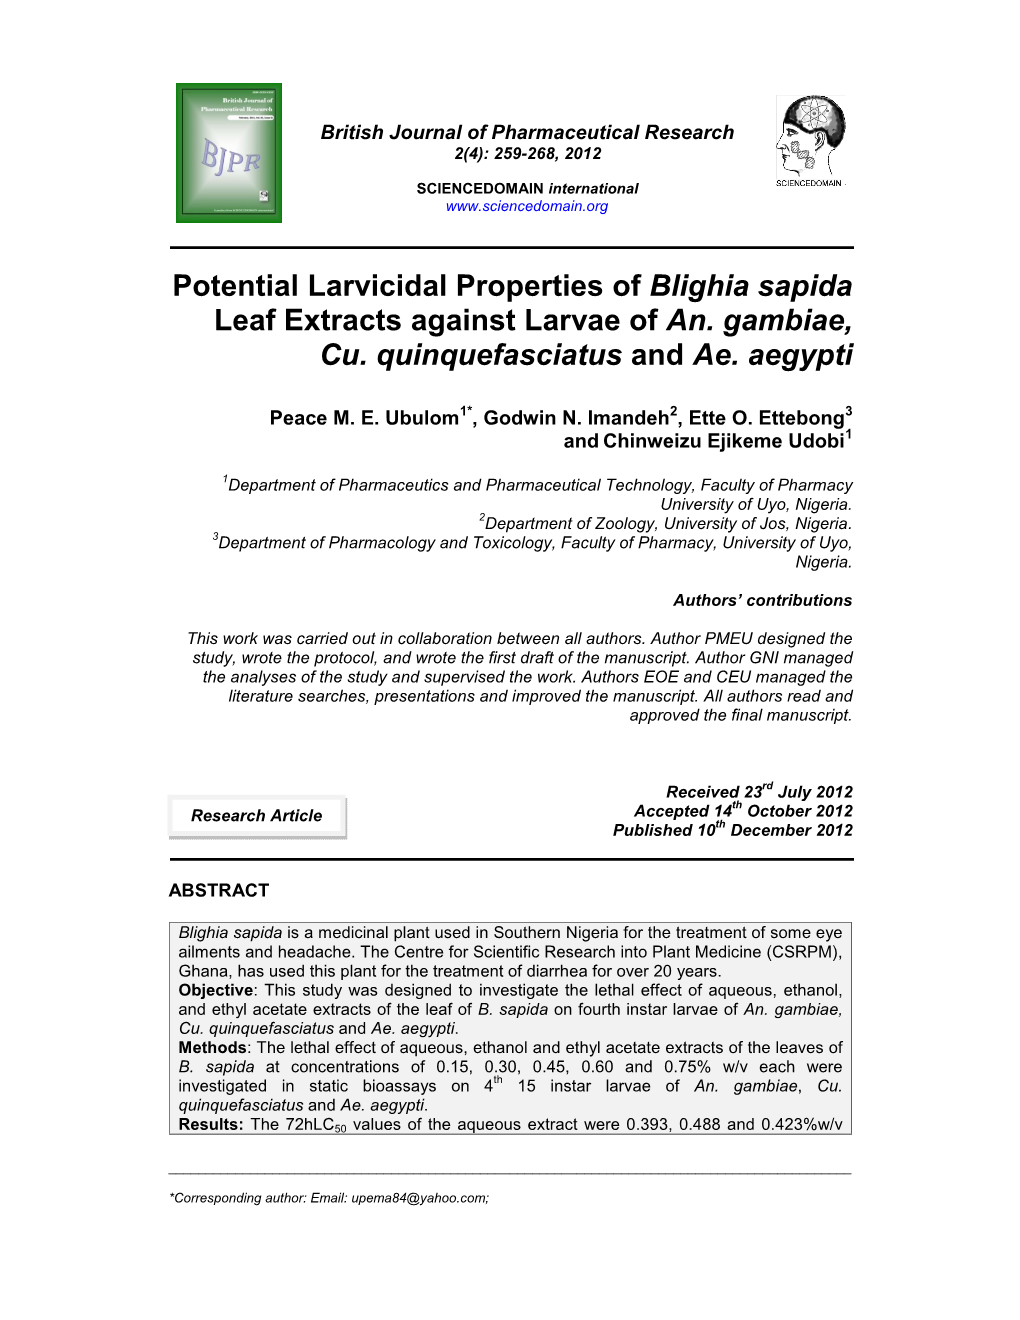 Potential Larvicidal Properties of Blighia Sapida Leaf Extracts Against Larvae of An